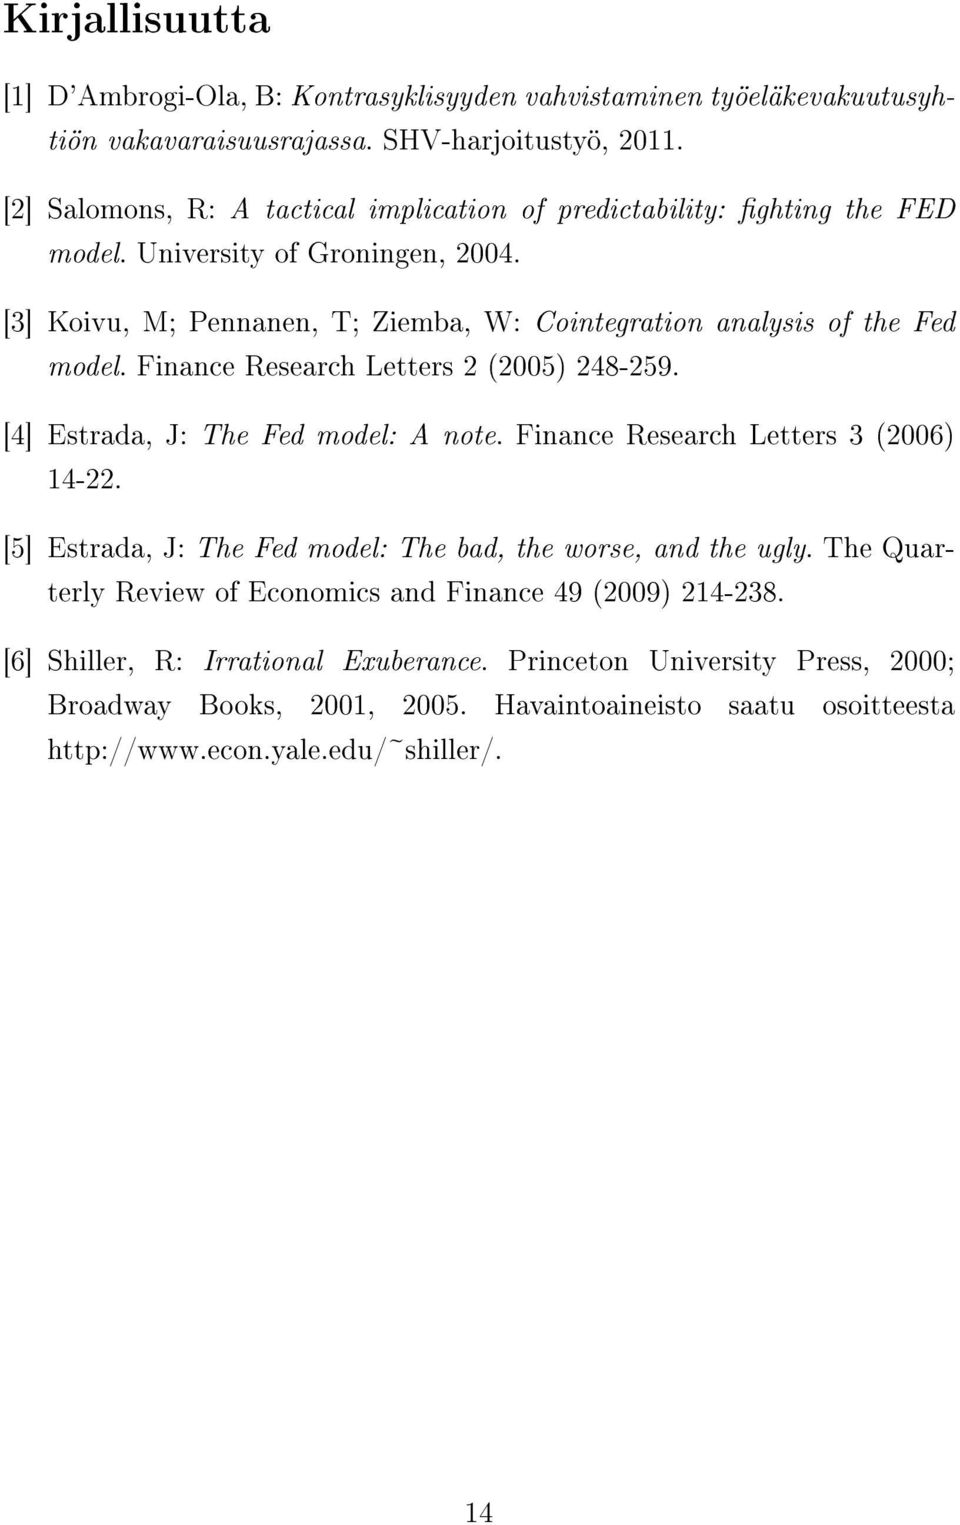 [3] Koivu, M; Pennanen, T; Ziemba, W: Cointegration analysis of the Fed model. Finance Research Letters 2 (2005) 248-259. [4] Estrada, J: The Fed model: A note.